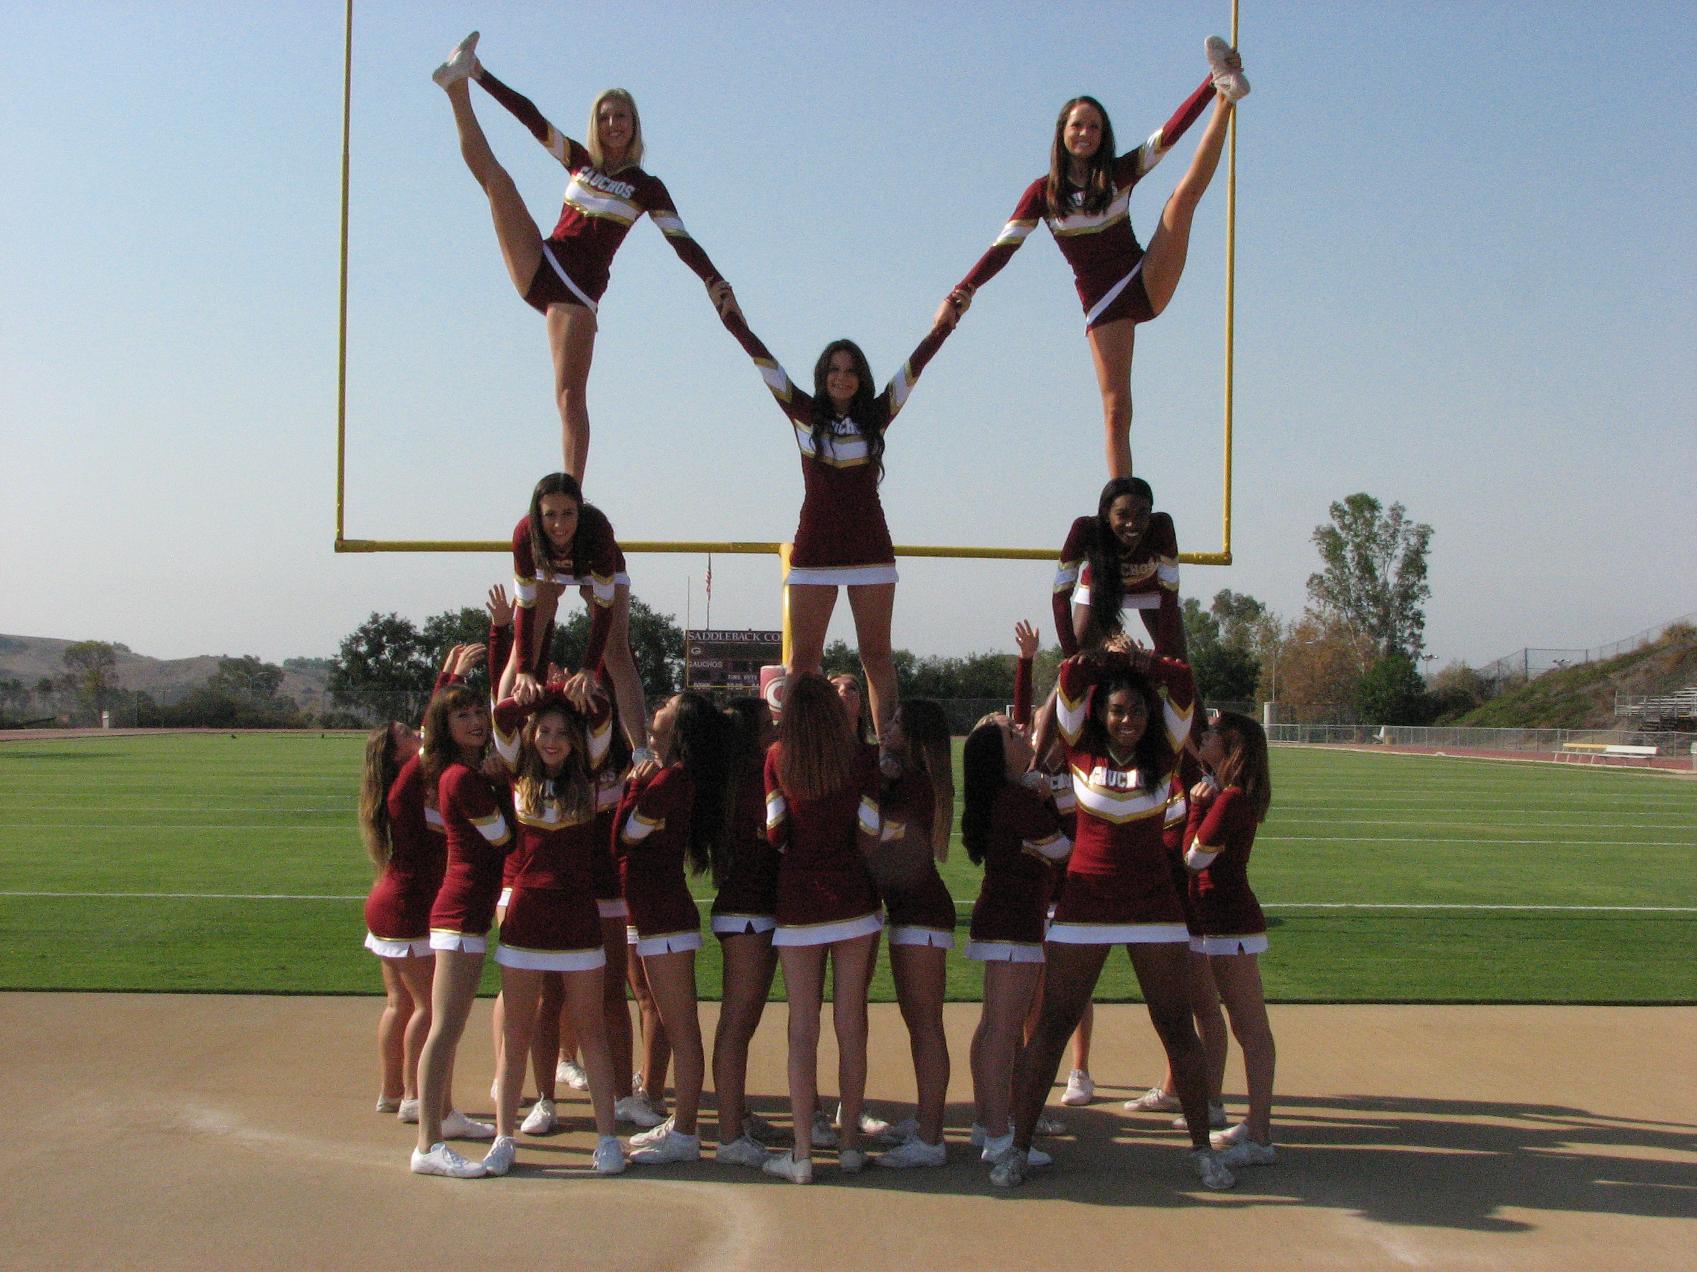 One of the many stunting formations from the 2016 Saddleback College cheerleaders.